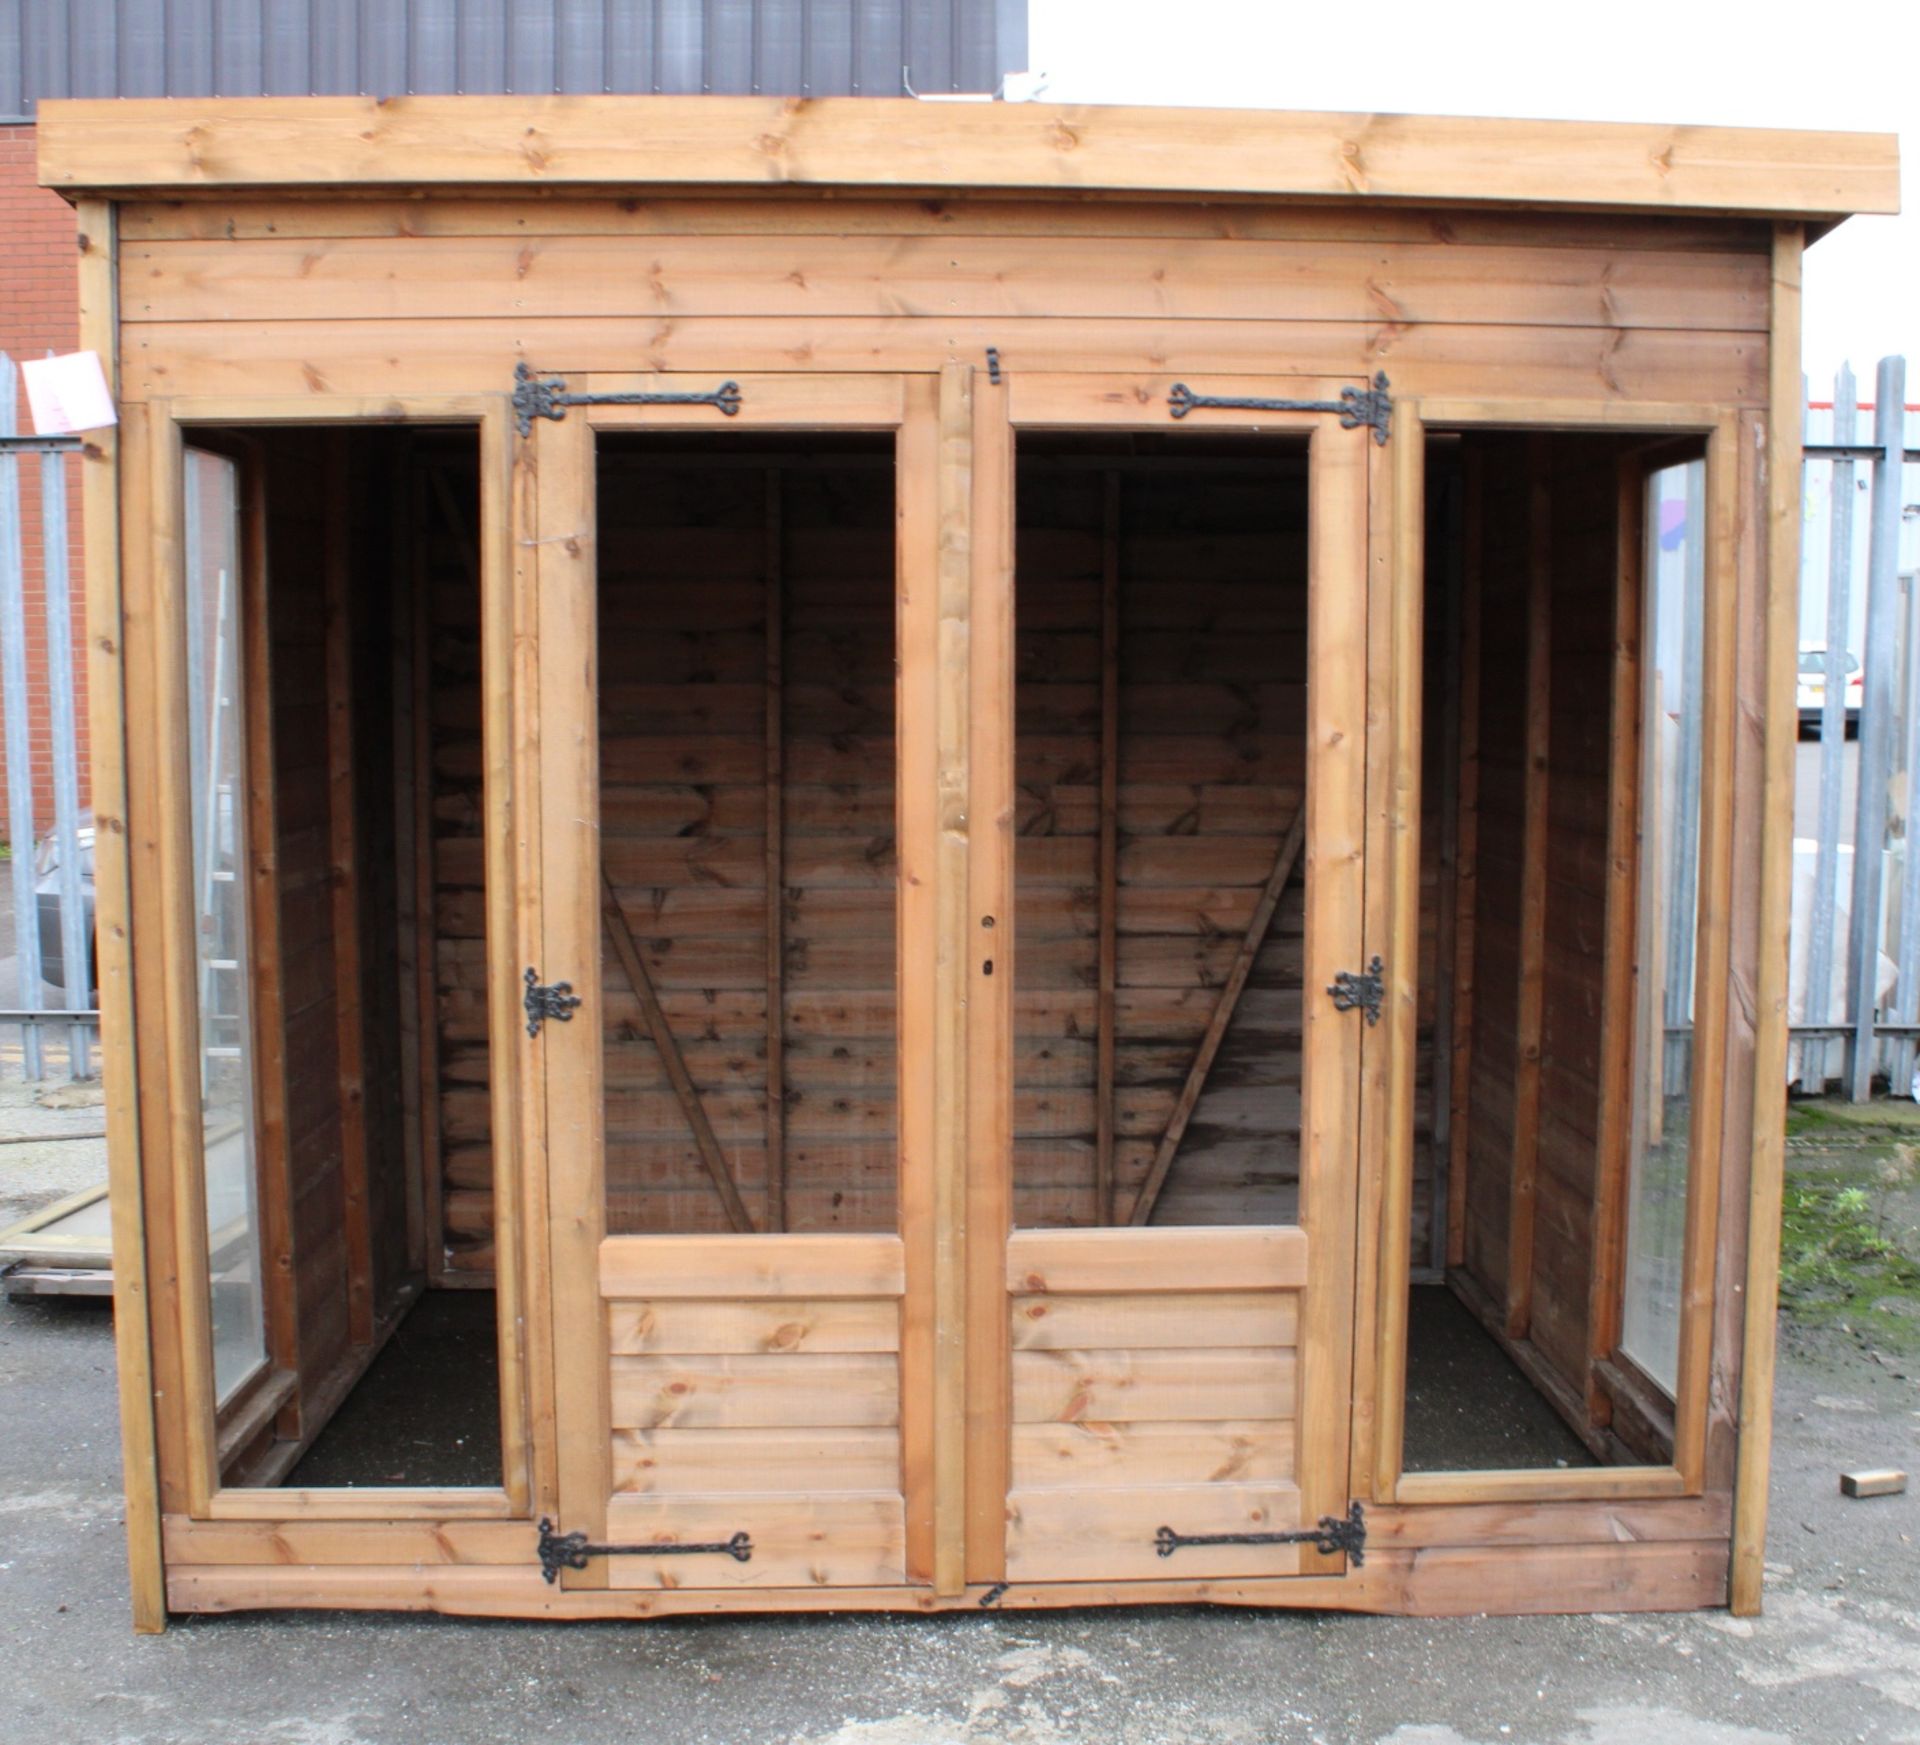 8x6 'clumber' summerhouse timber shed building, Standard 16mm Nominal Cladding RRP£ 2,640 - Image 3 of 4